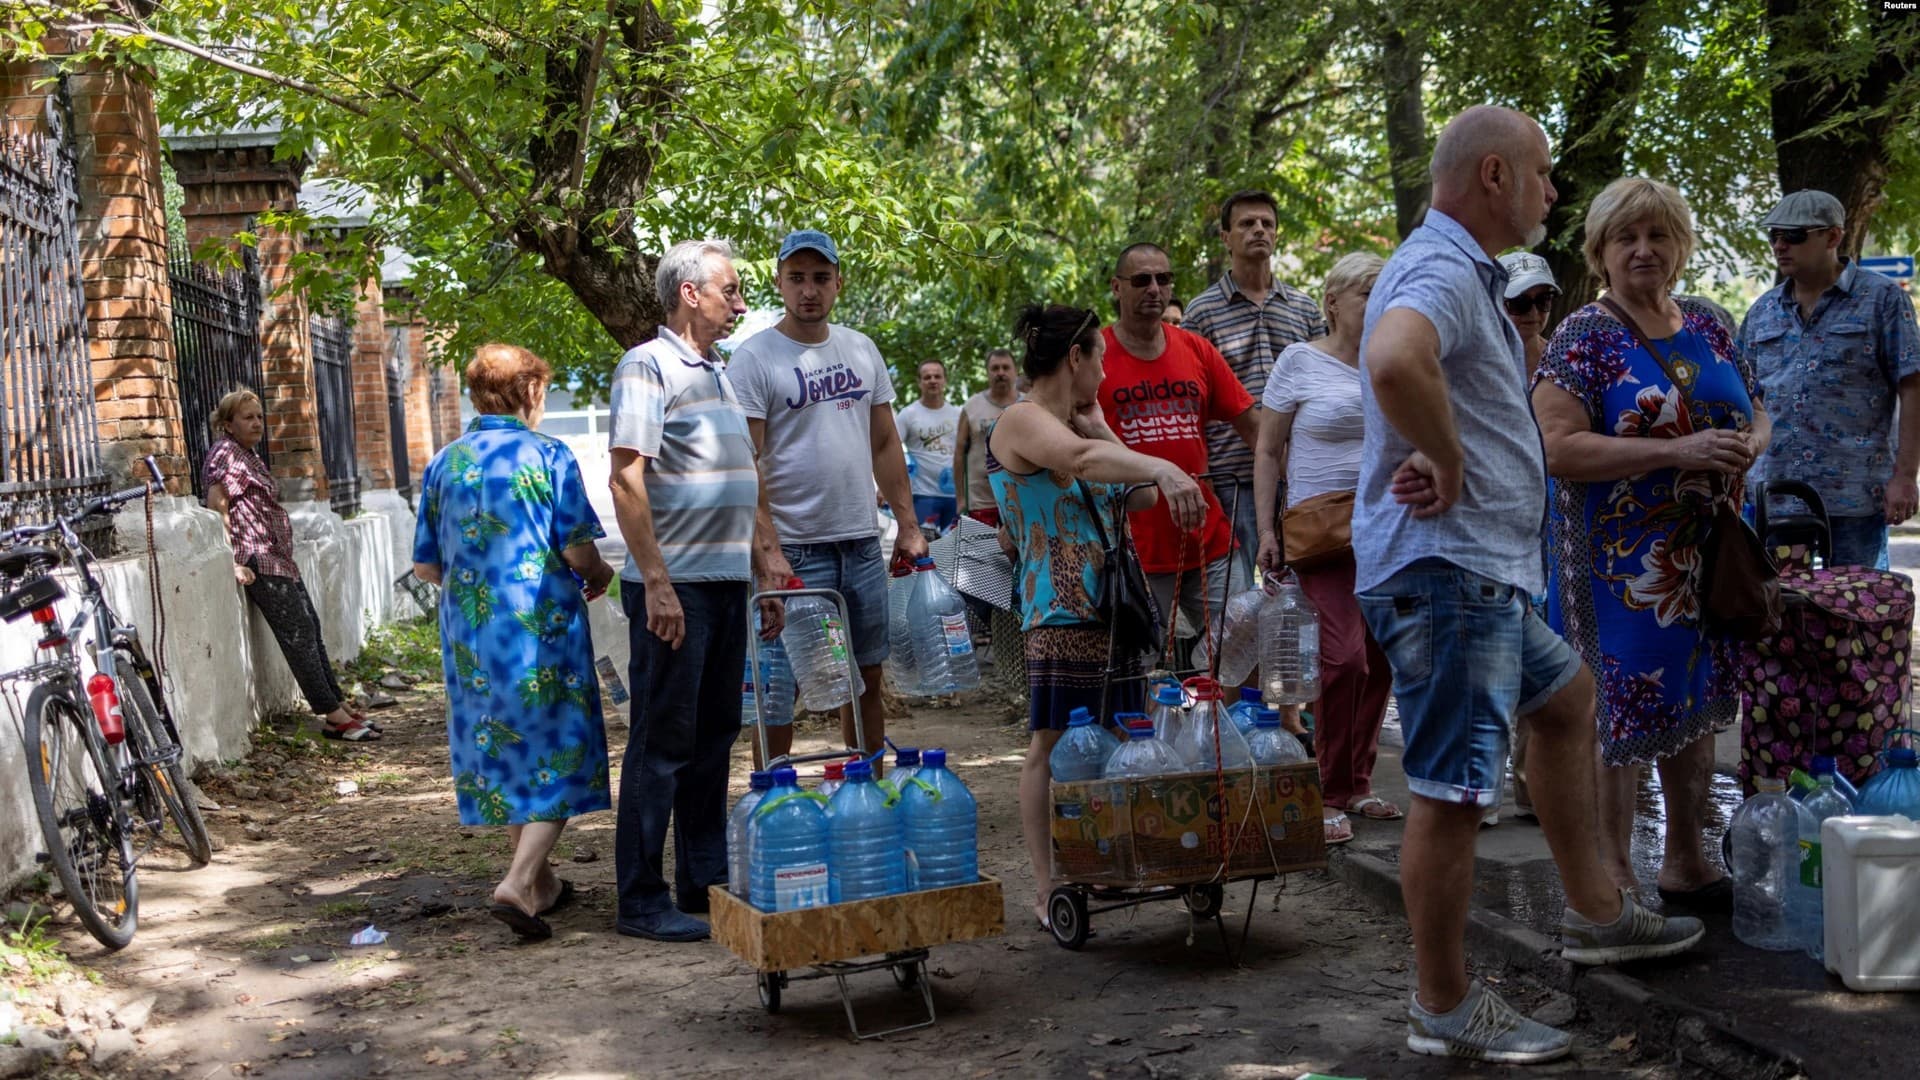 After continuous shelling that damaged infrastructure, residents of the town of Mykolayiv fill plastic bottles and jerrycans with fresh drinking water as others wait in line